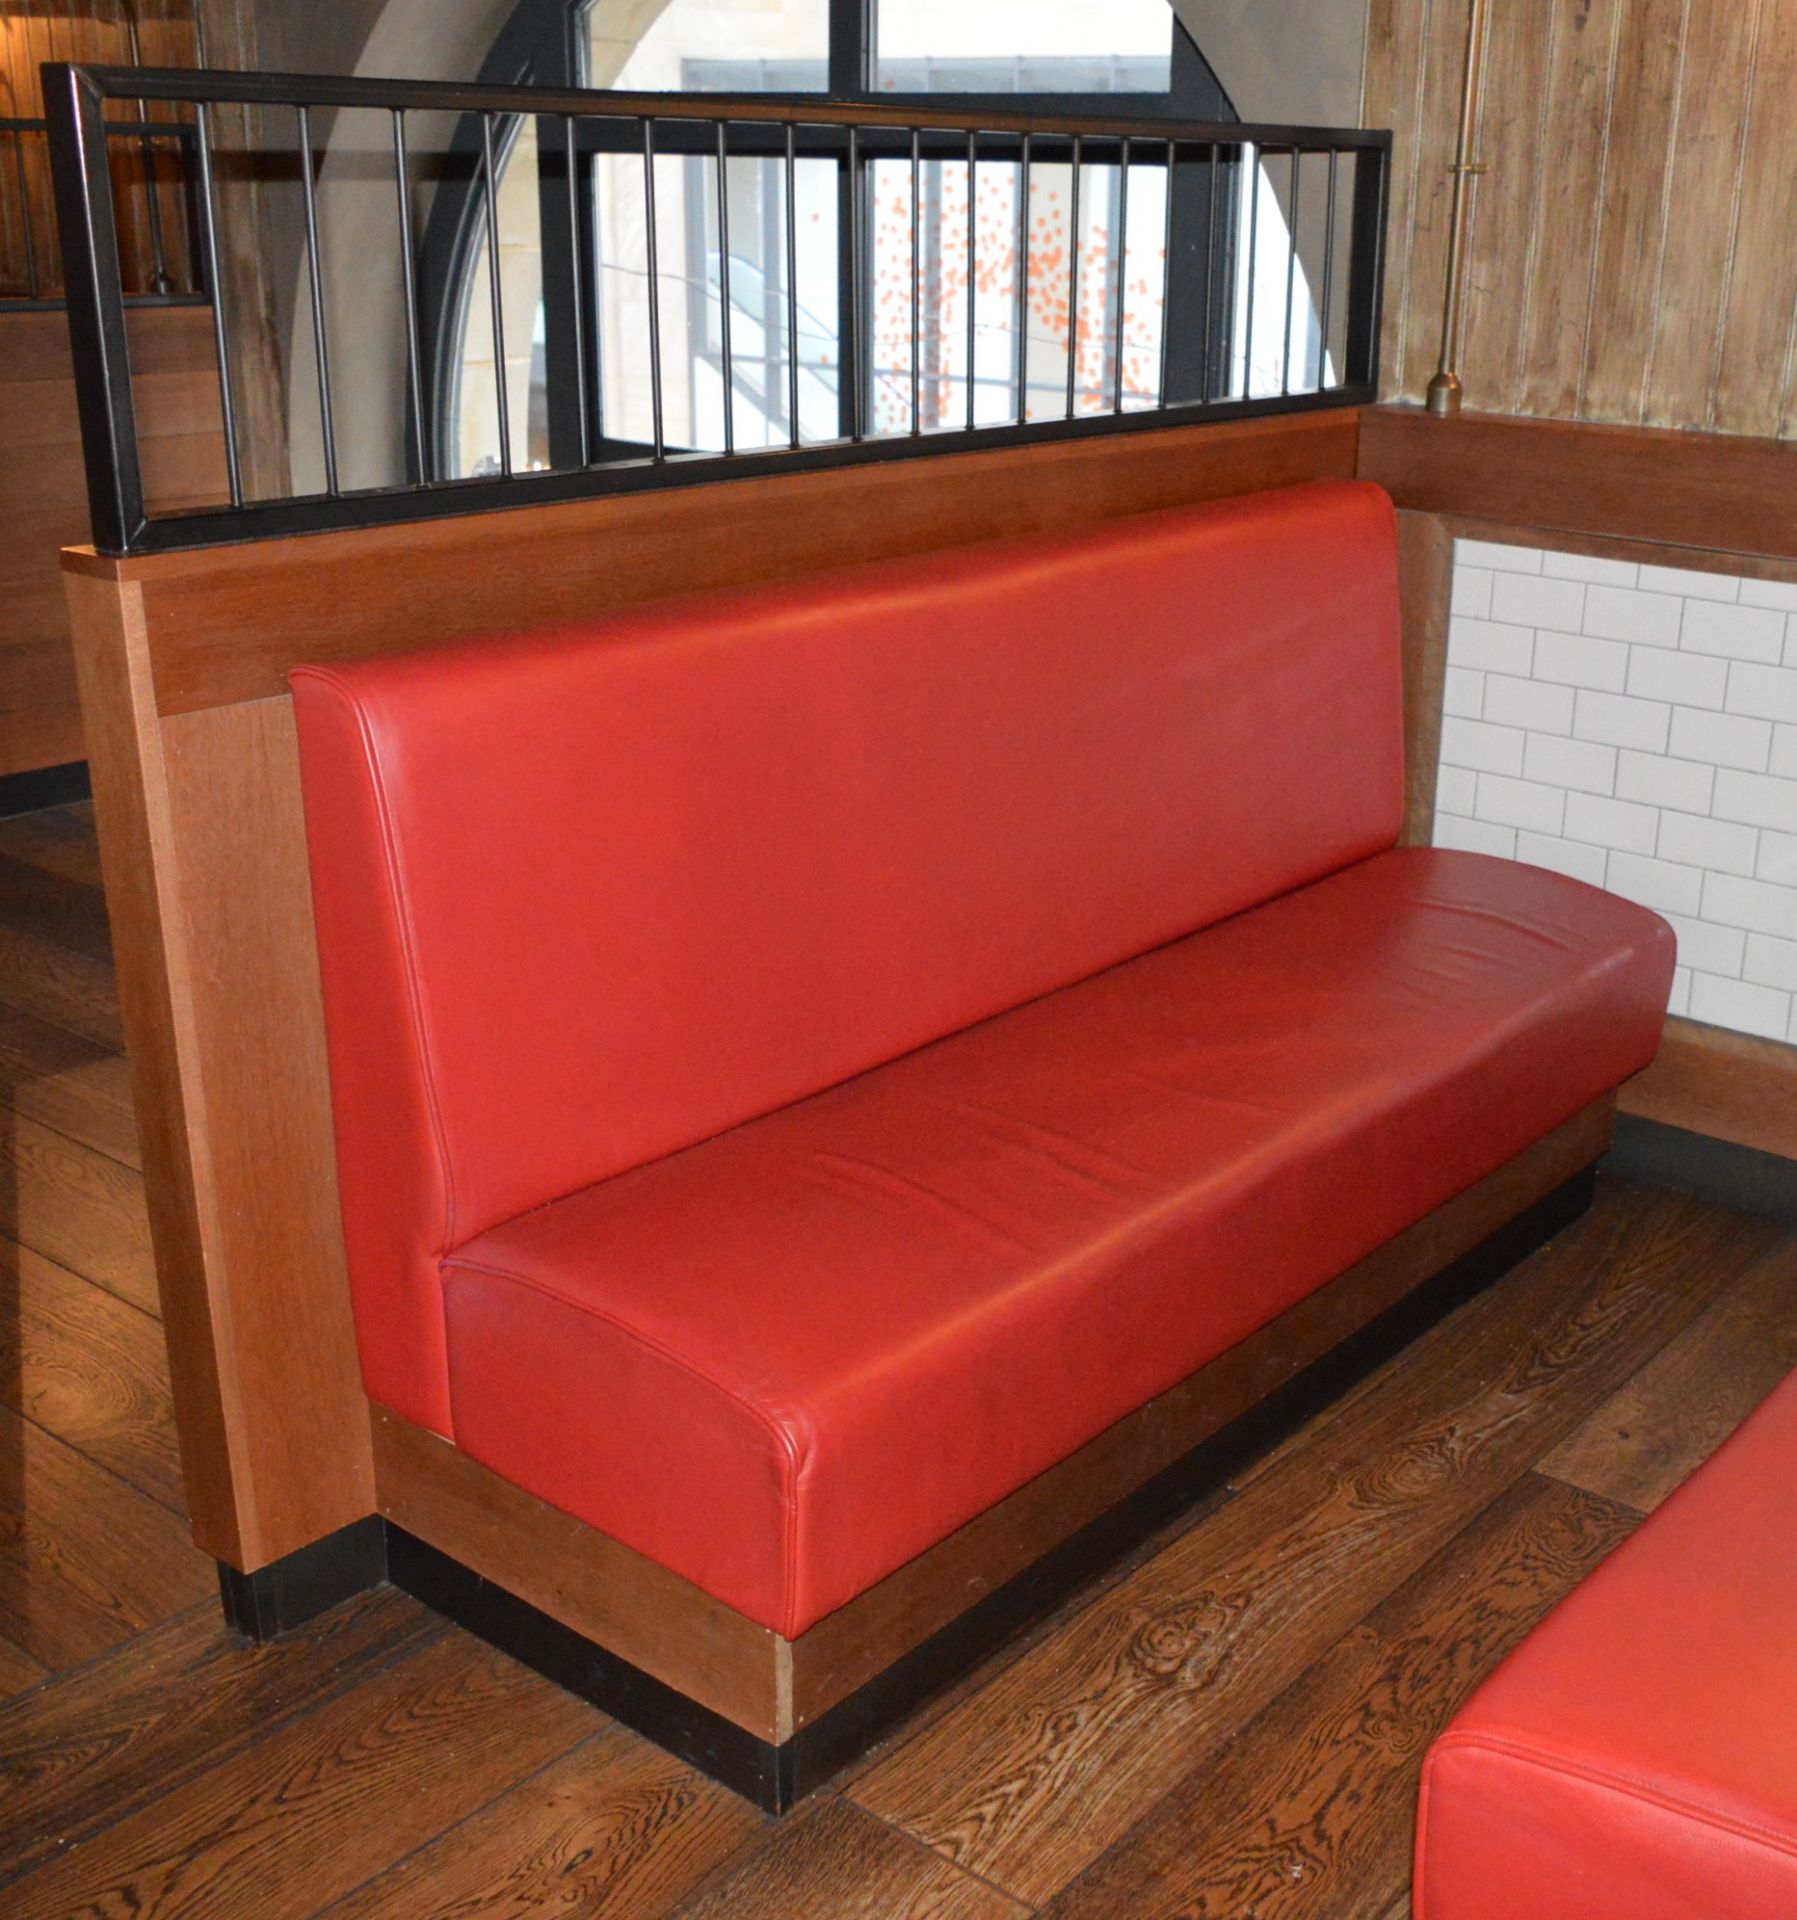 1 x Contemporary Seating Booth Upholstered in Red Leather - Image 2 of 11